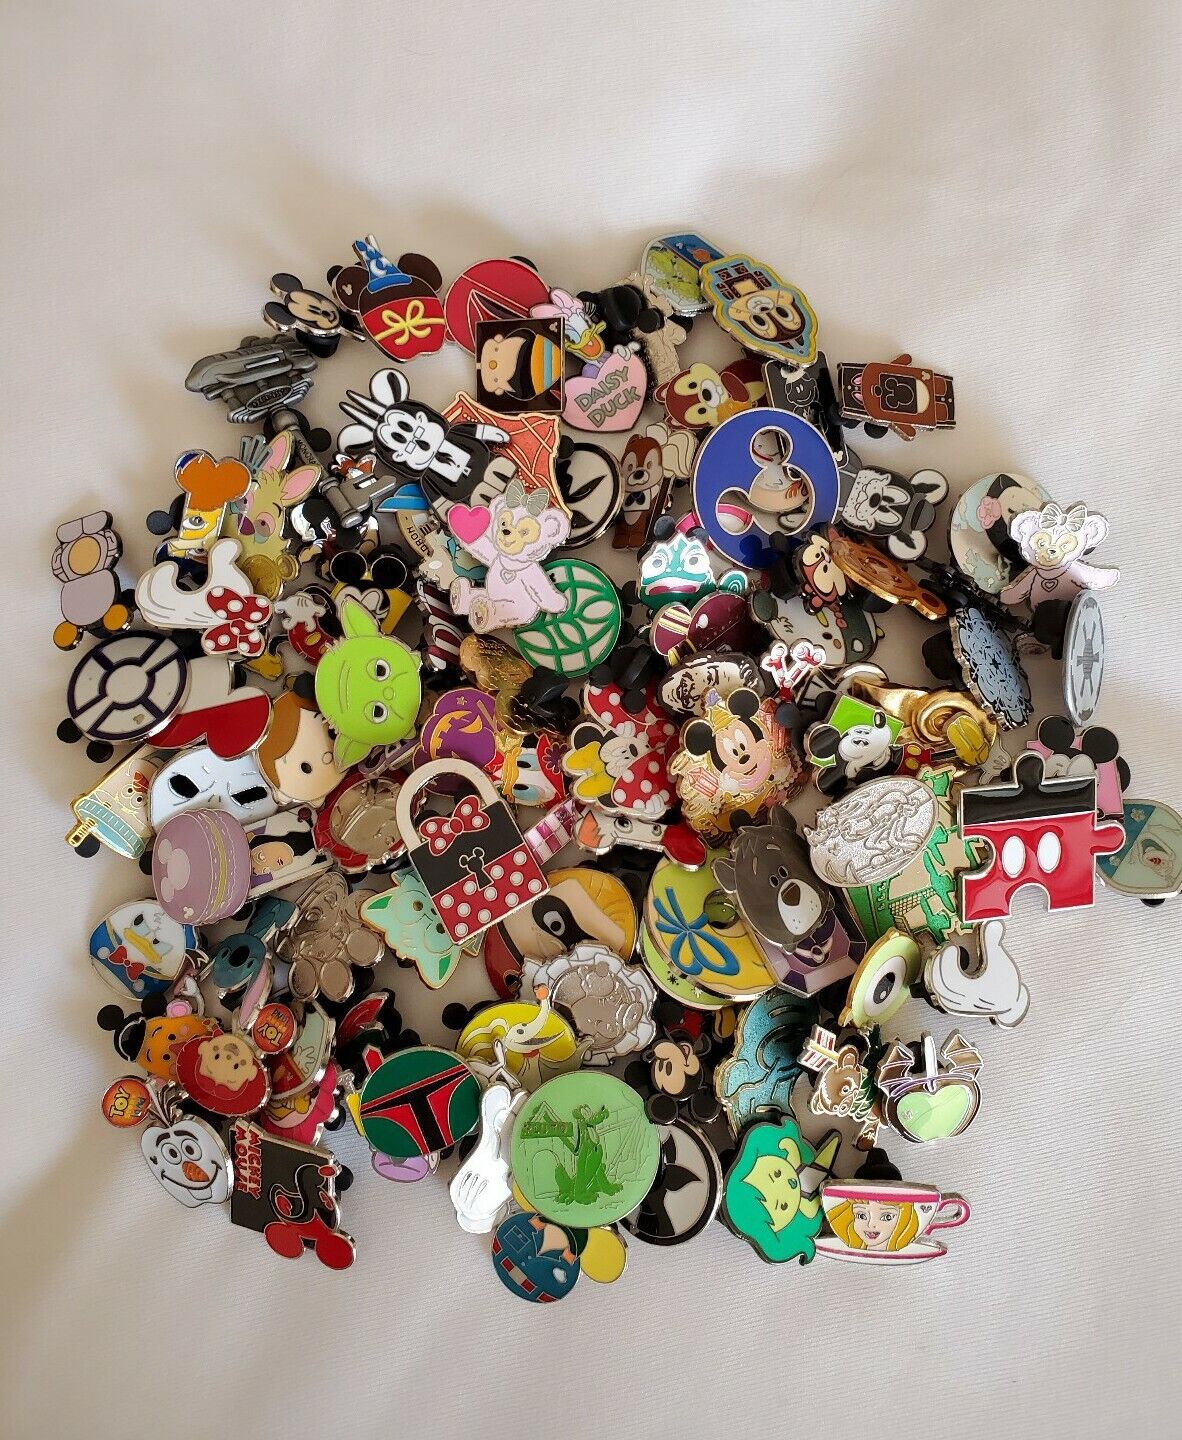 Disney Trading Pins Lot of 25, 50, 100, 150, 200, 250, 500 All Unique/Different